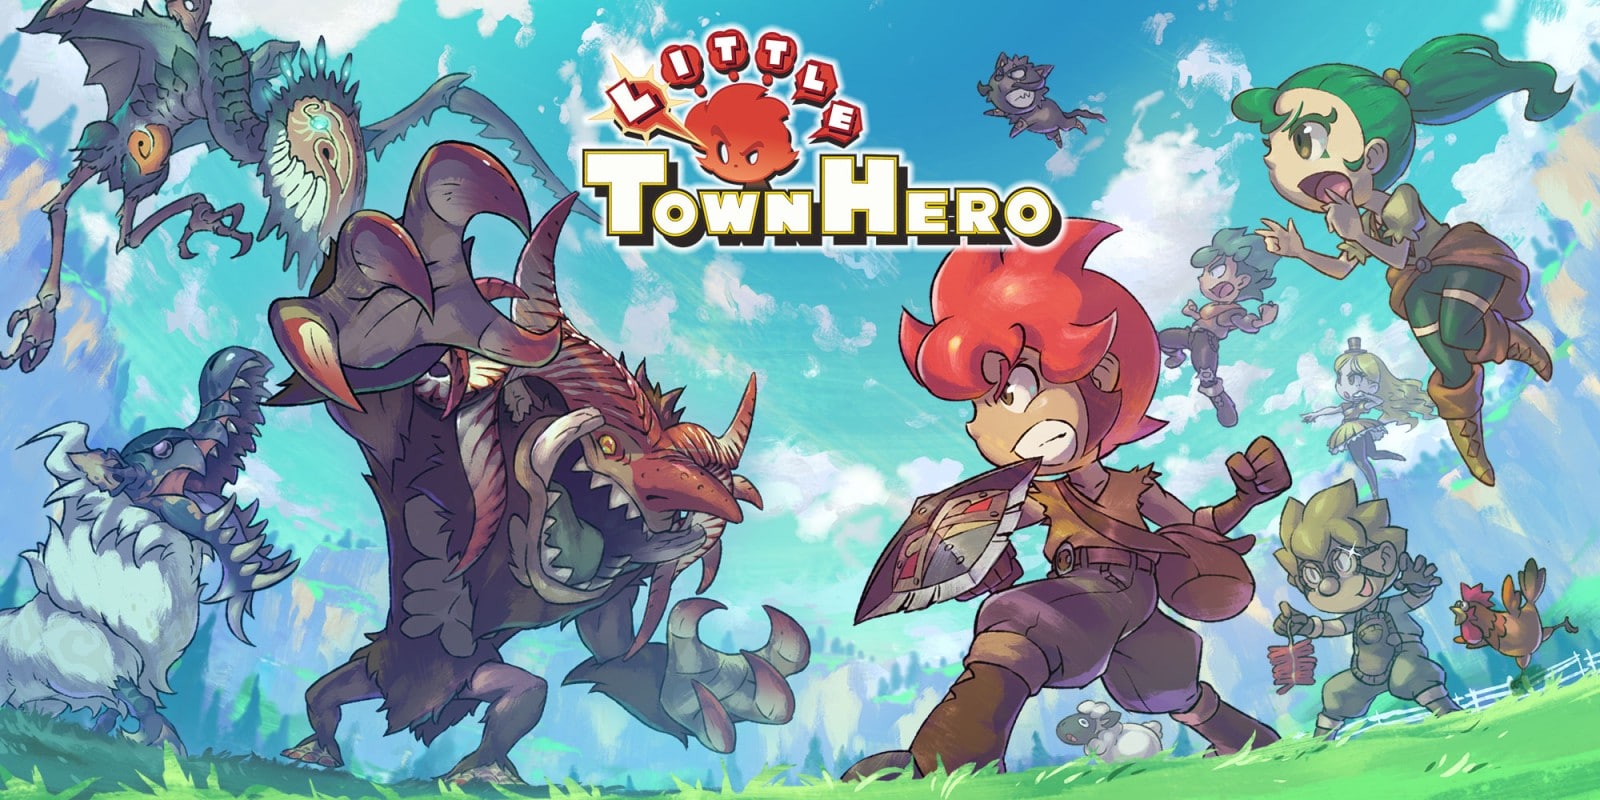 Little Town Hero (Game Freak) details combat system and mechanics